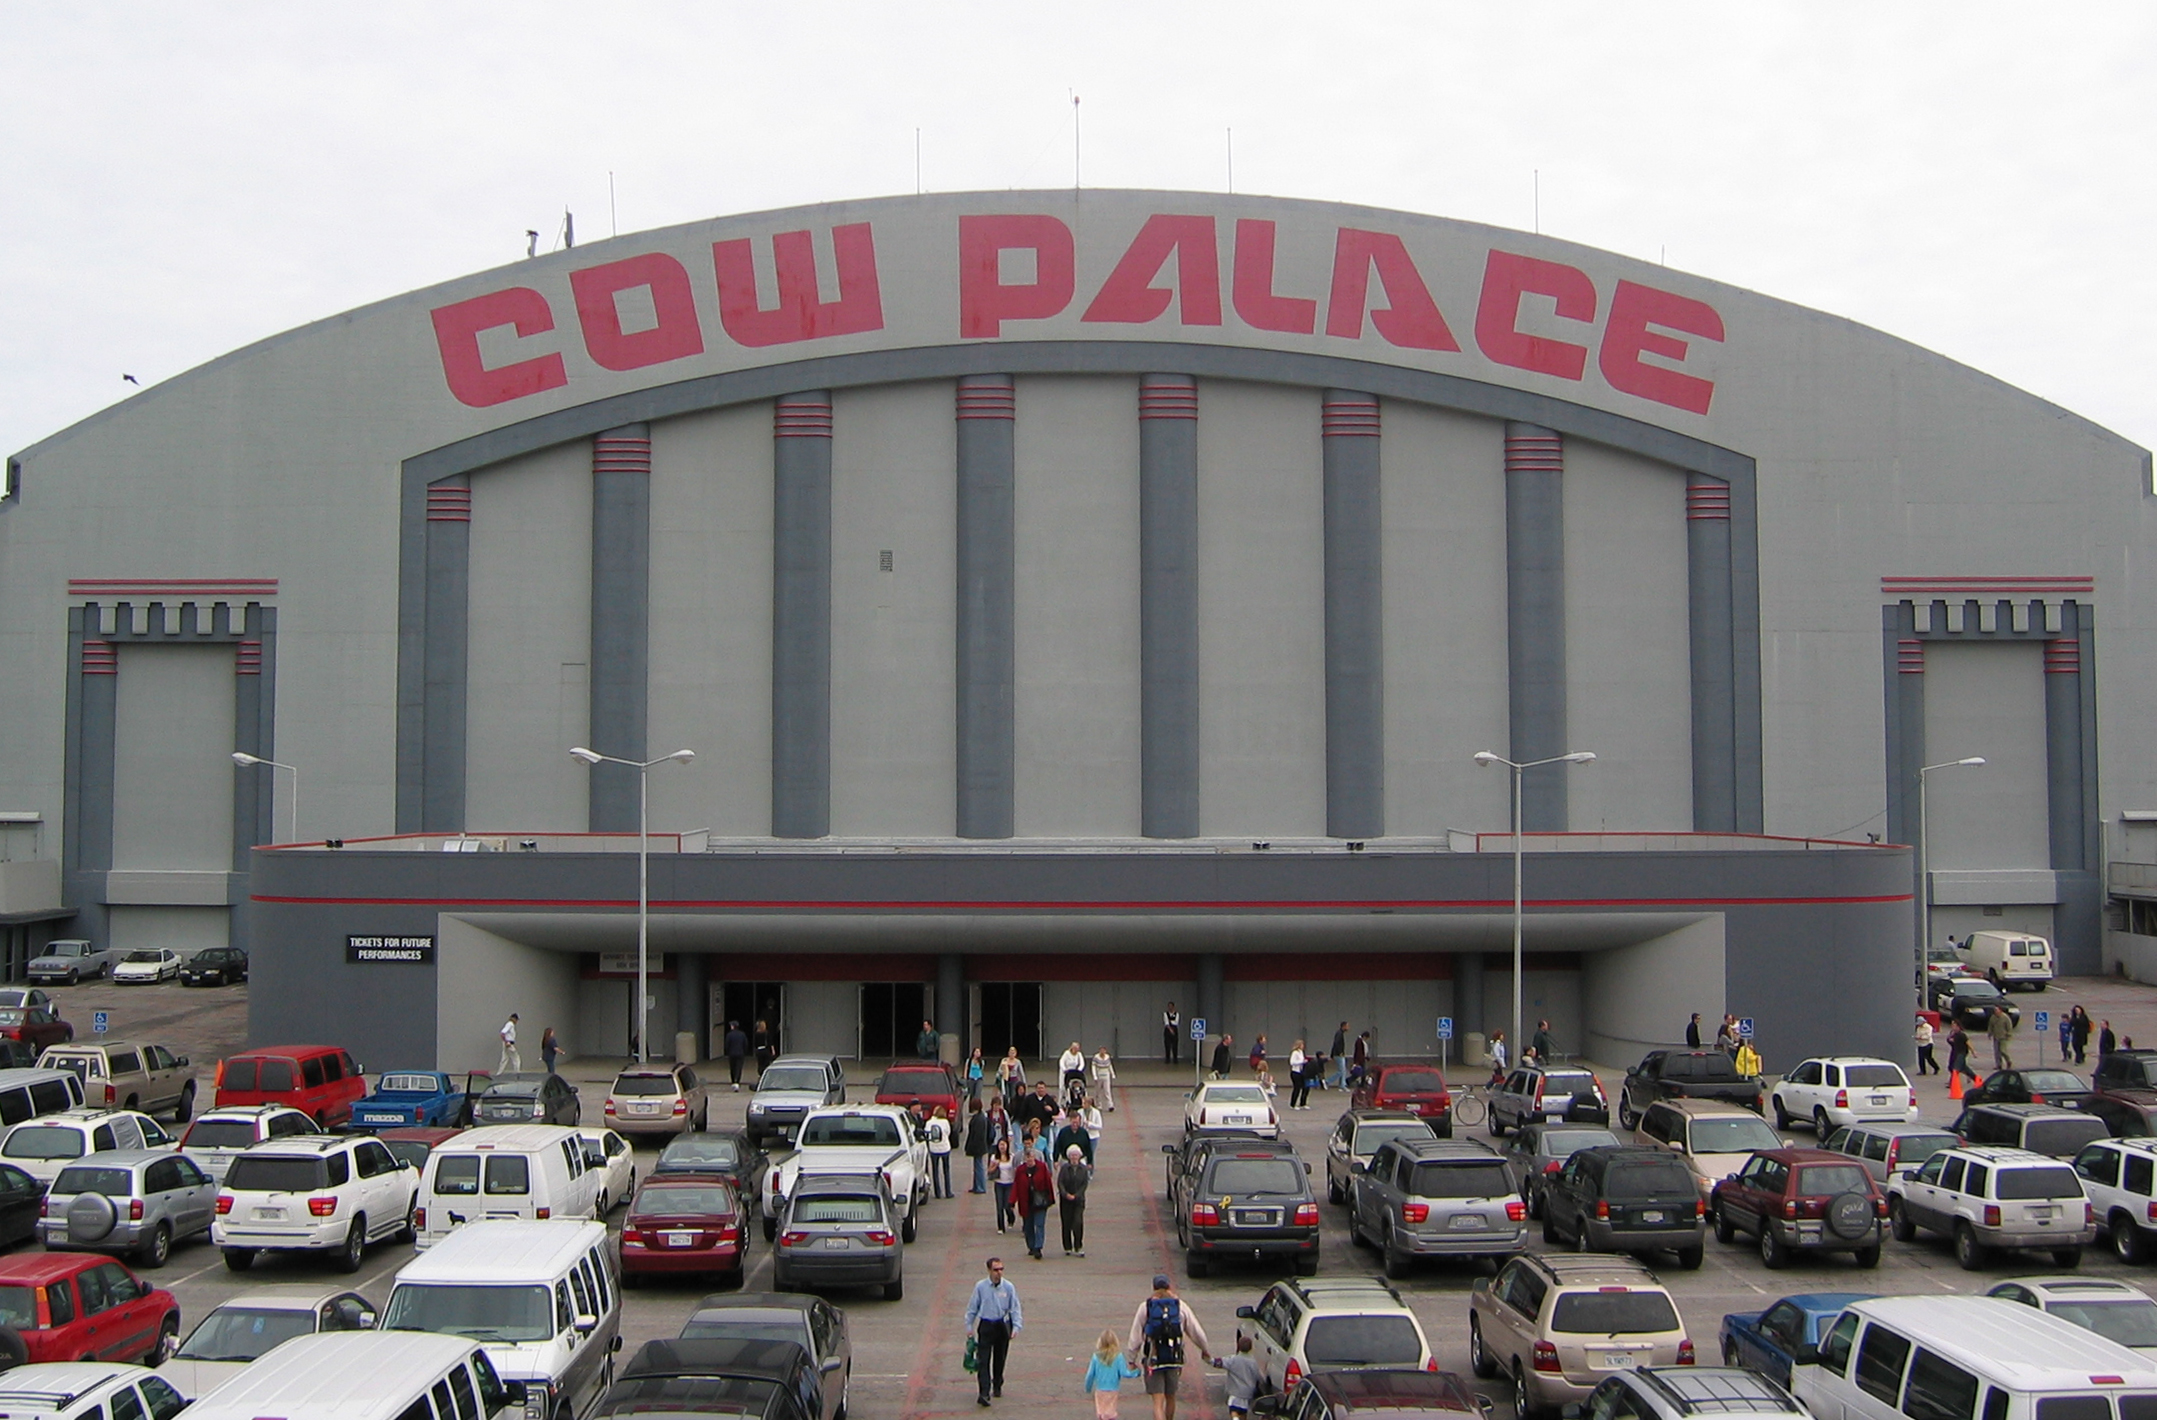 The Cow Palace of San Francisco